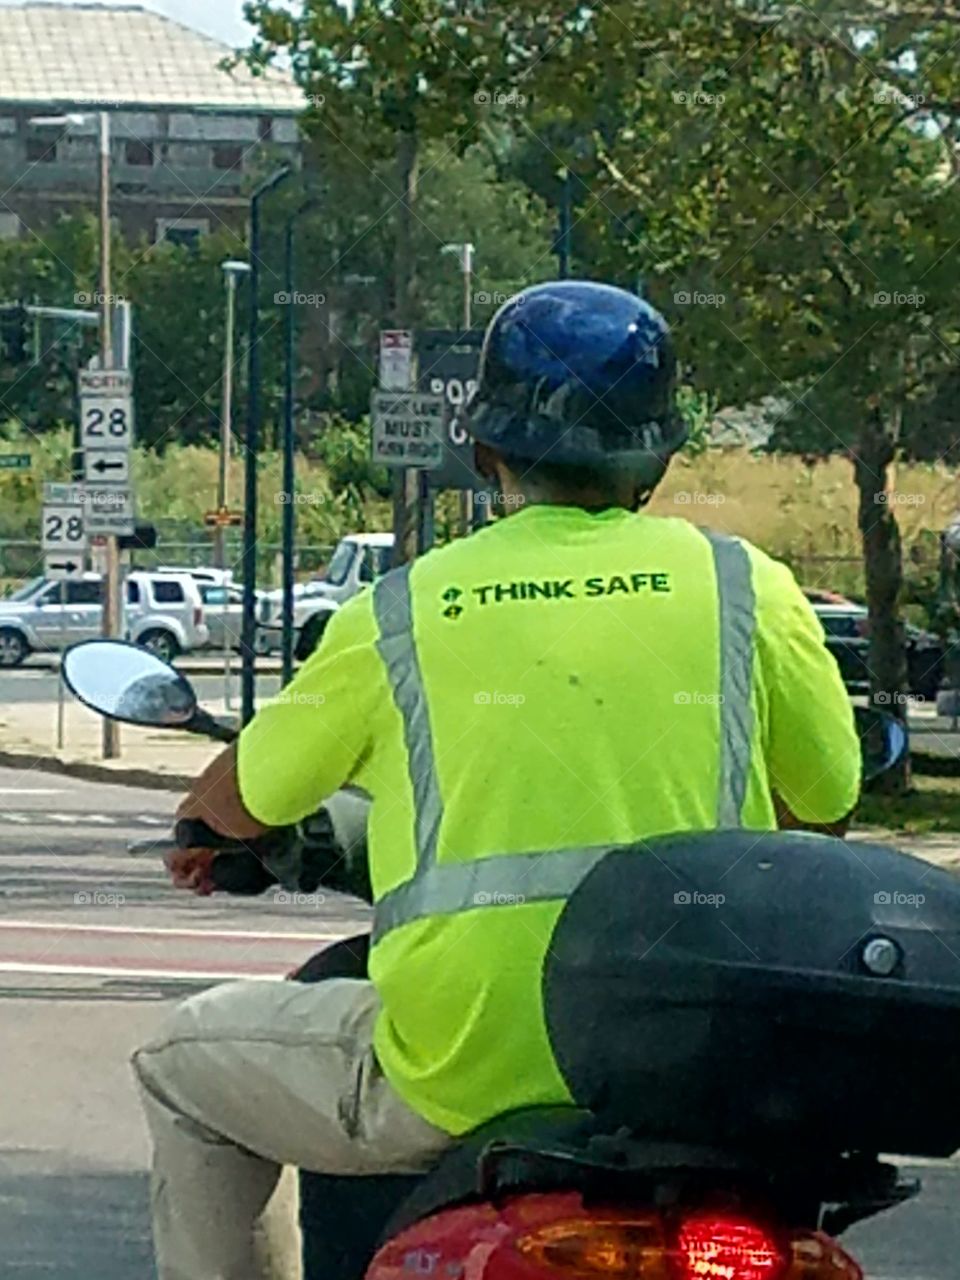 Man on scooter in city traffic with fluorescent green shirt says "think safe". Helmet black.